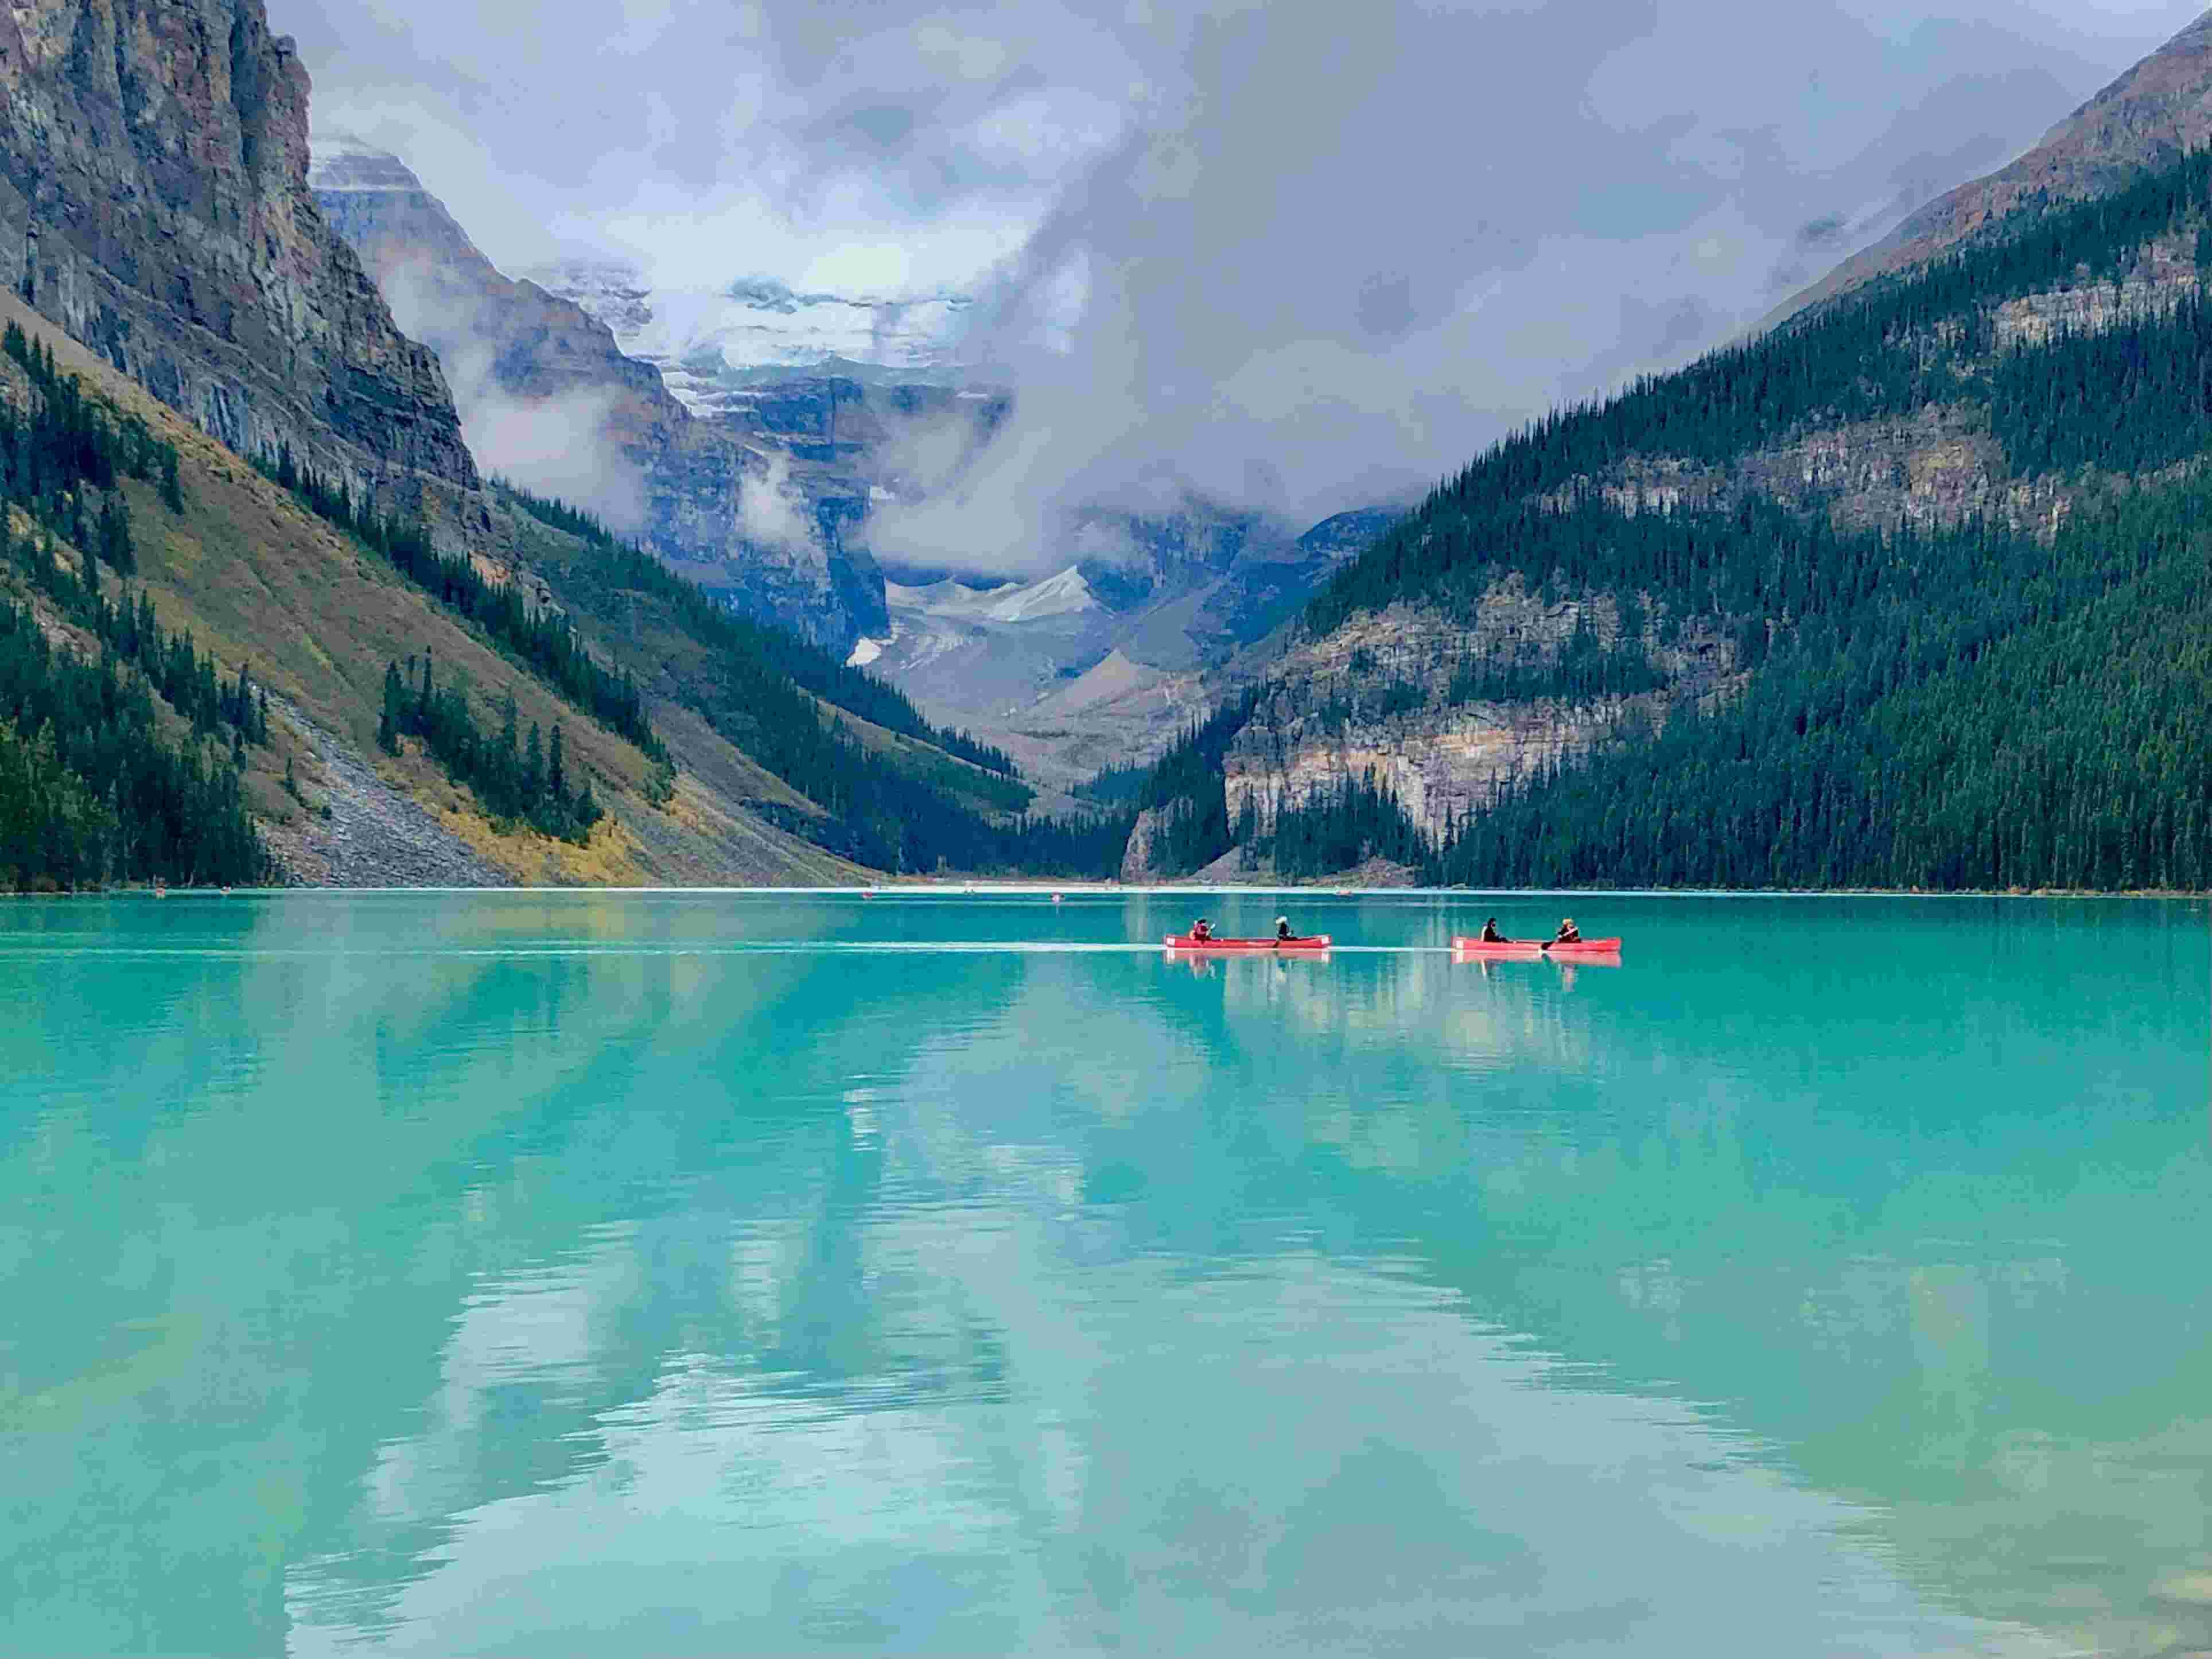 Calgary, Columbia Icefield, Banff National Park, Kamloops, Vancouver, Victoria 6-day Tour